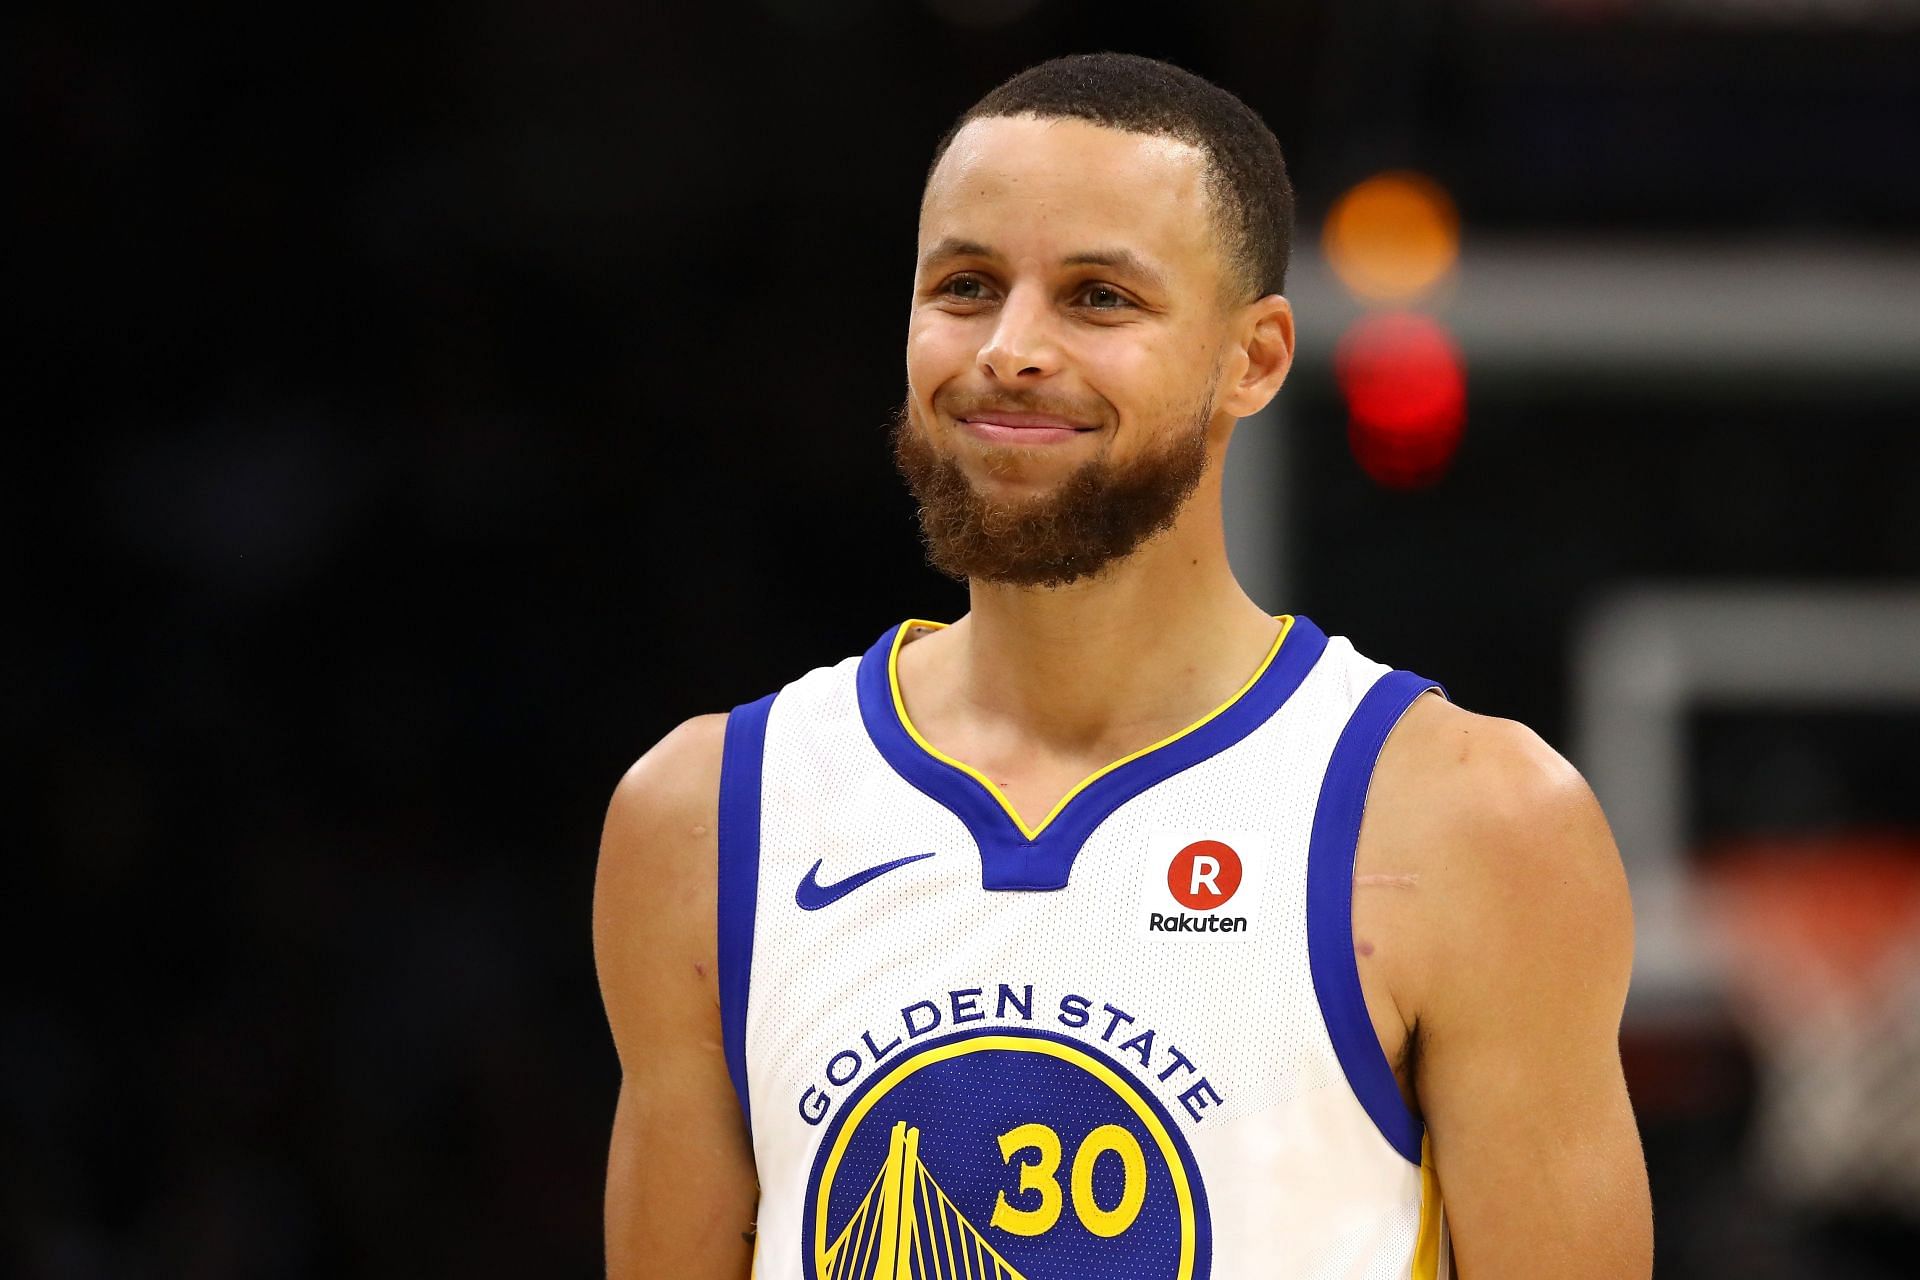 Basketball Forever on Instagram: Stephen Curry will be the HIGHEST PAID  player in the NBA for the 2023/24 season 💰